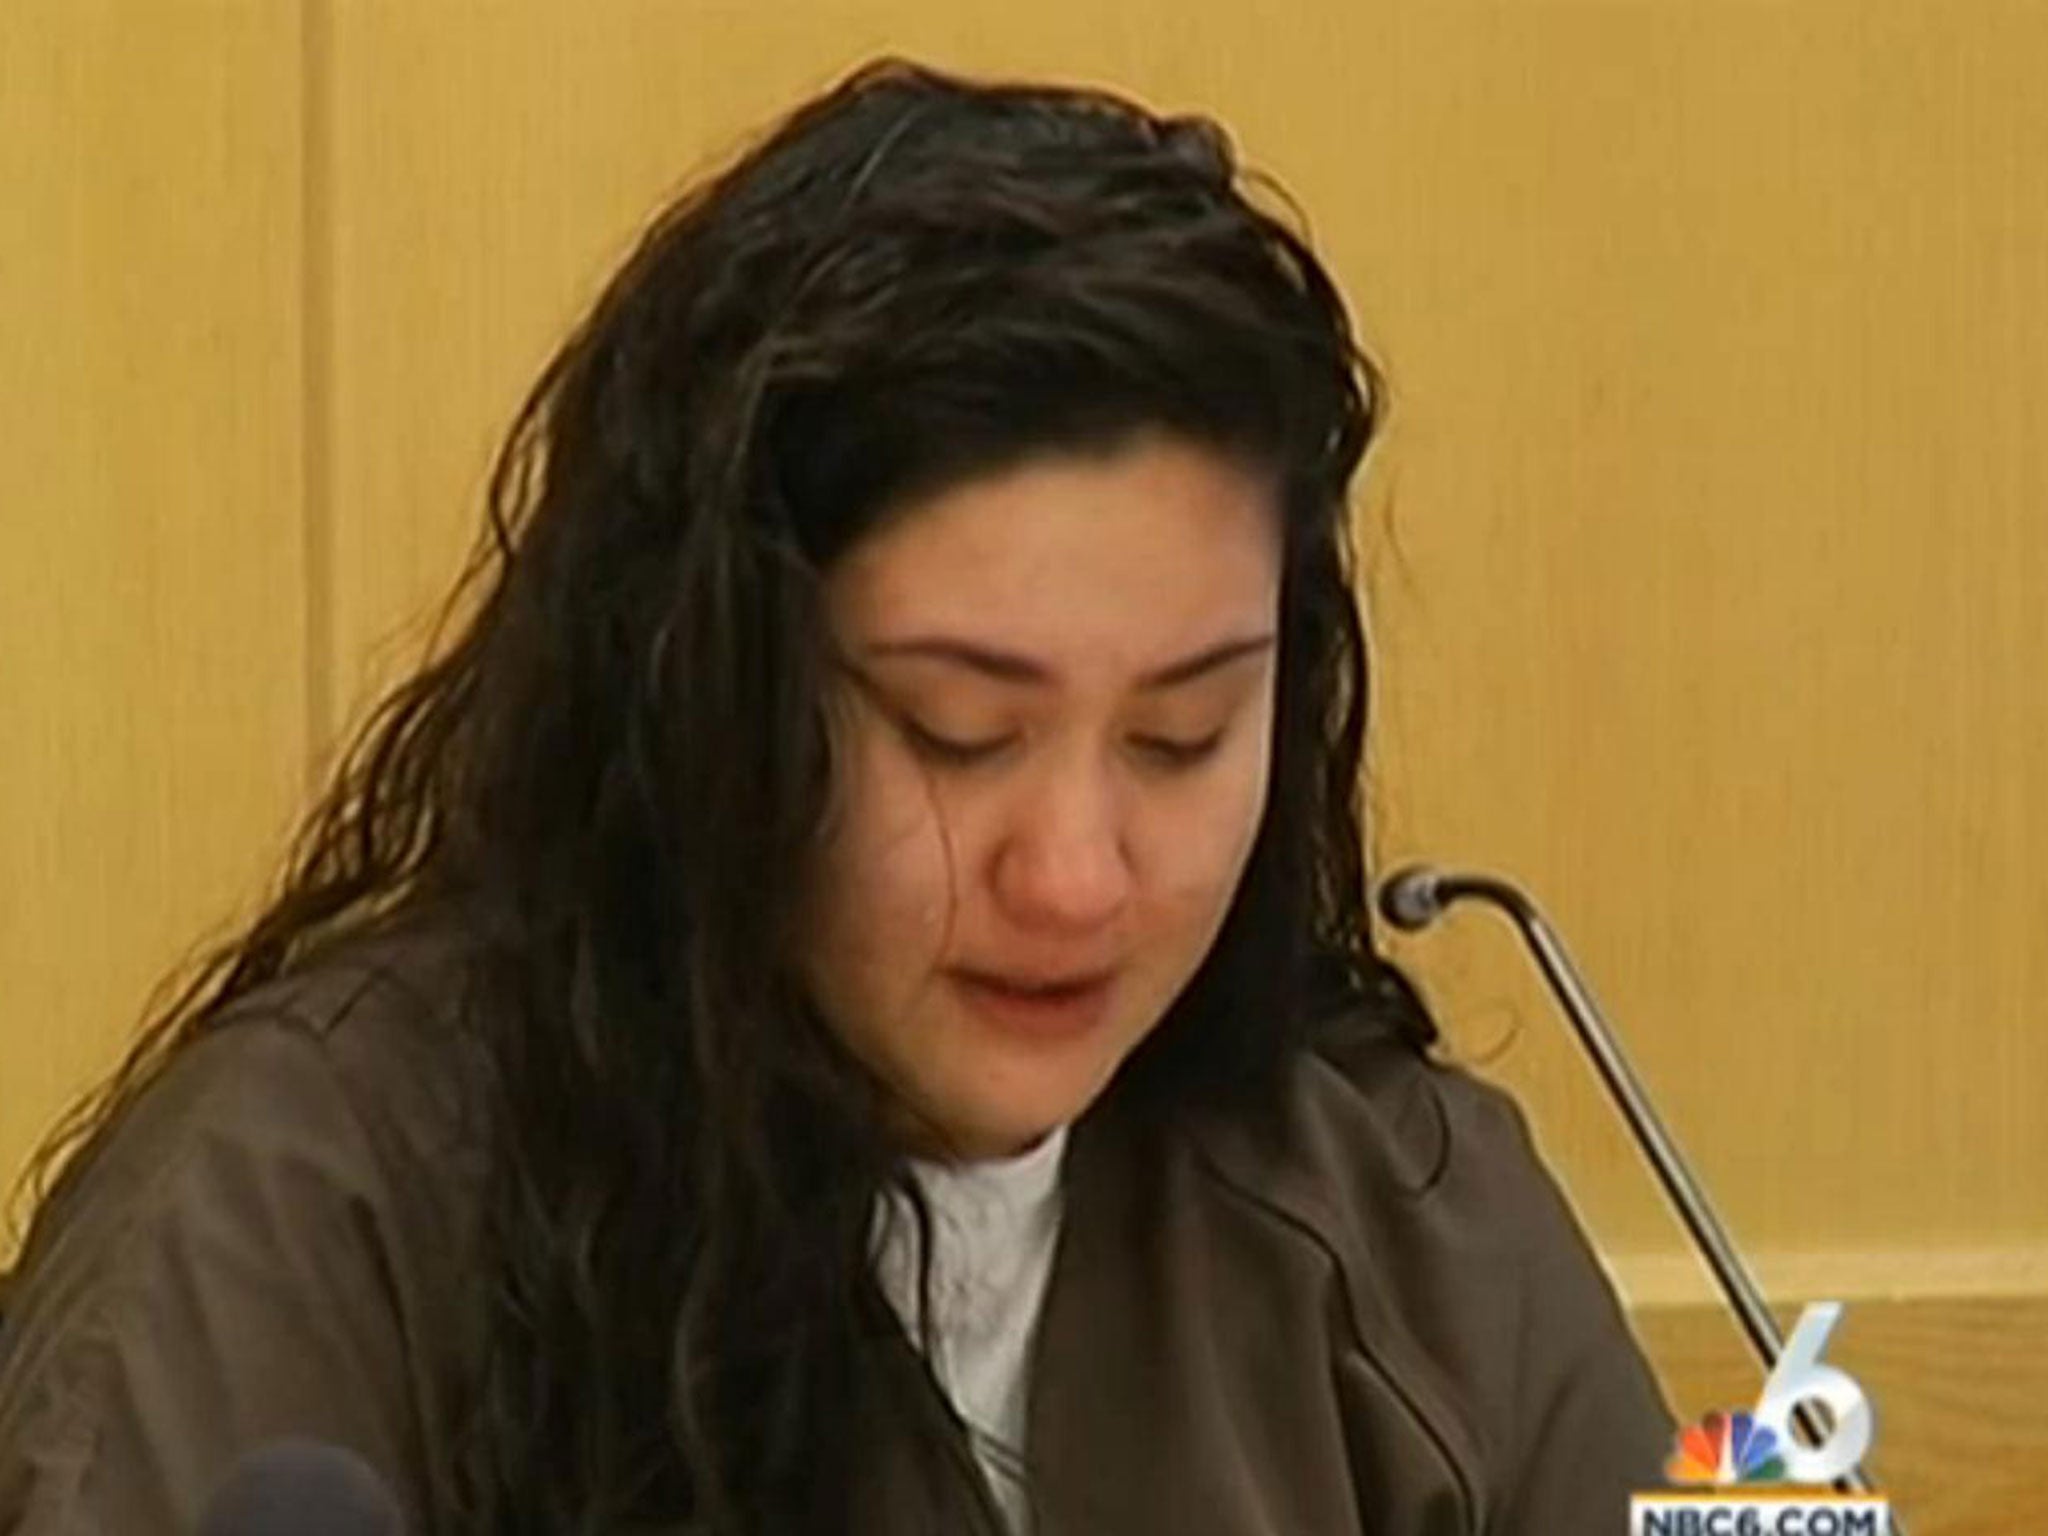 Kayla Mendoza has been sentenced to 24 years in prison